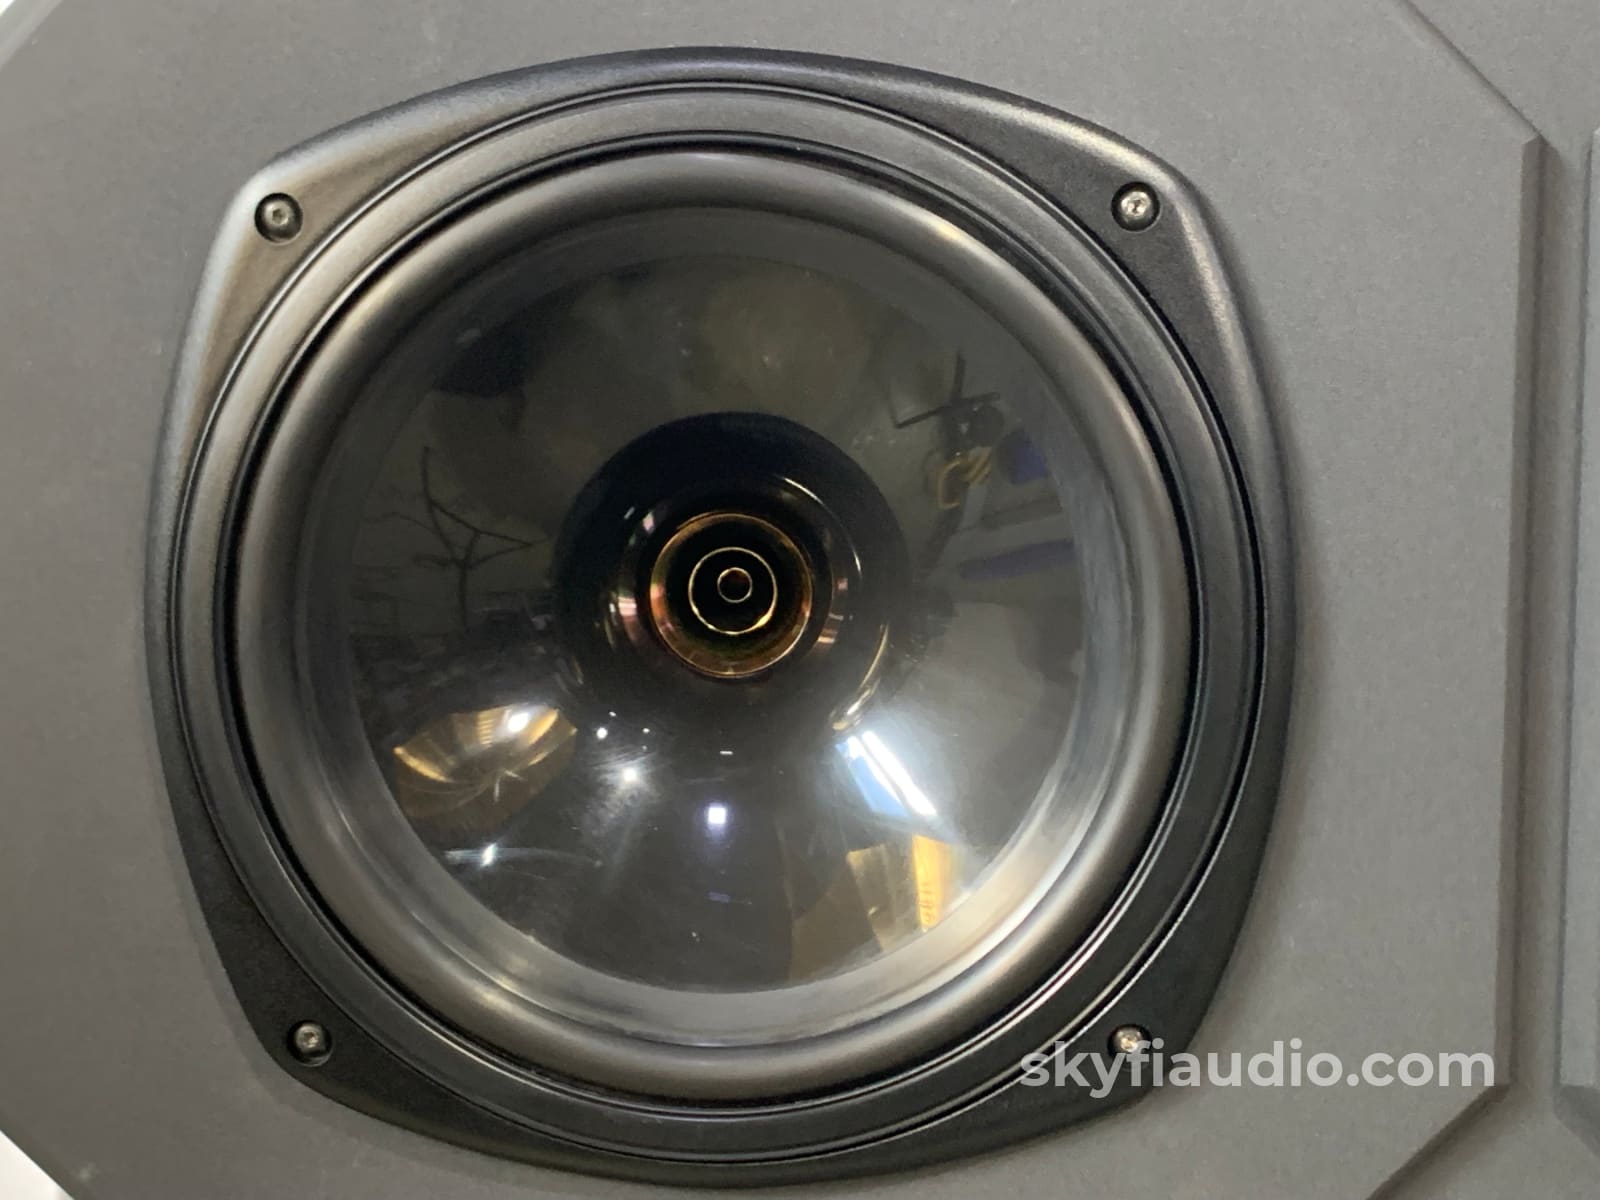 Tannoy System 1000 Professional Studio Monitors With 10 Drivers Speakers